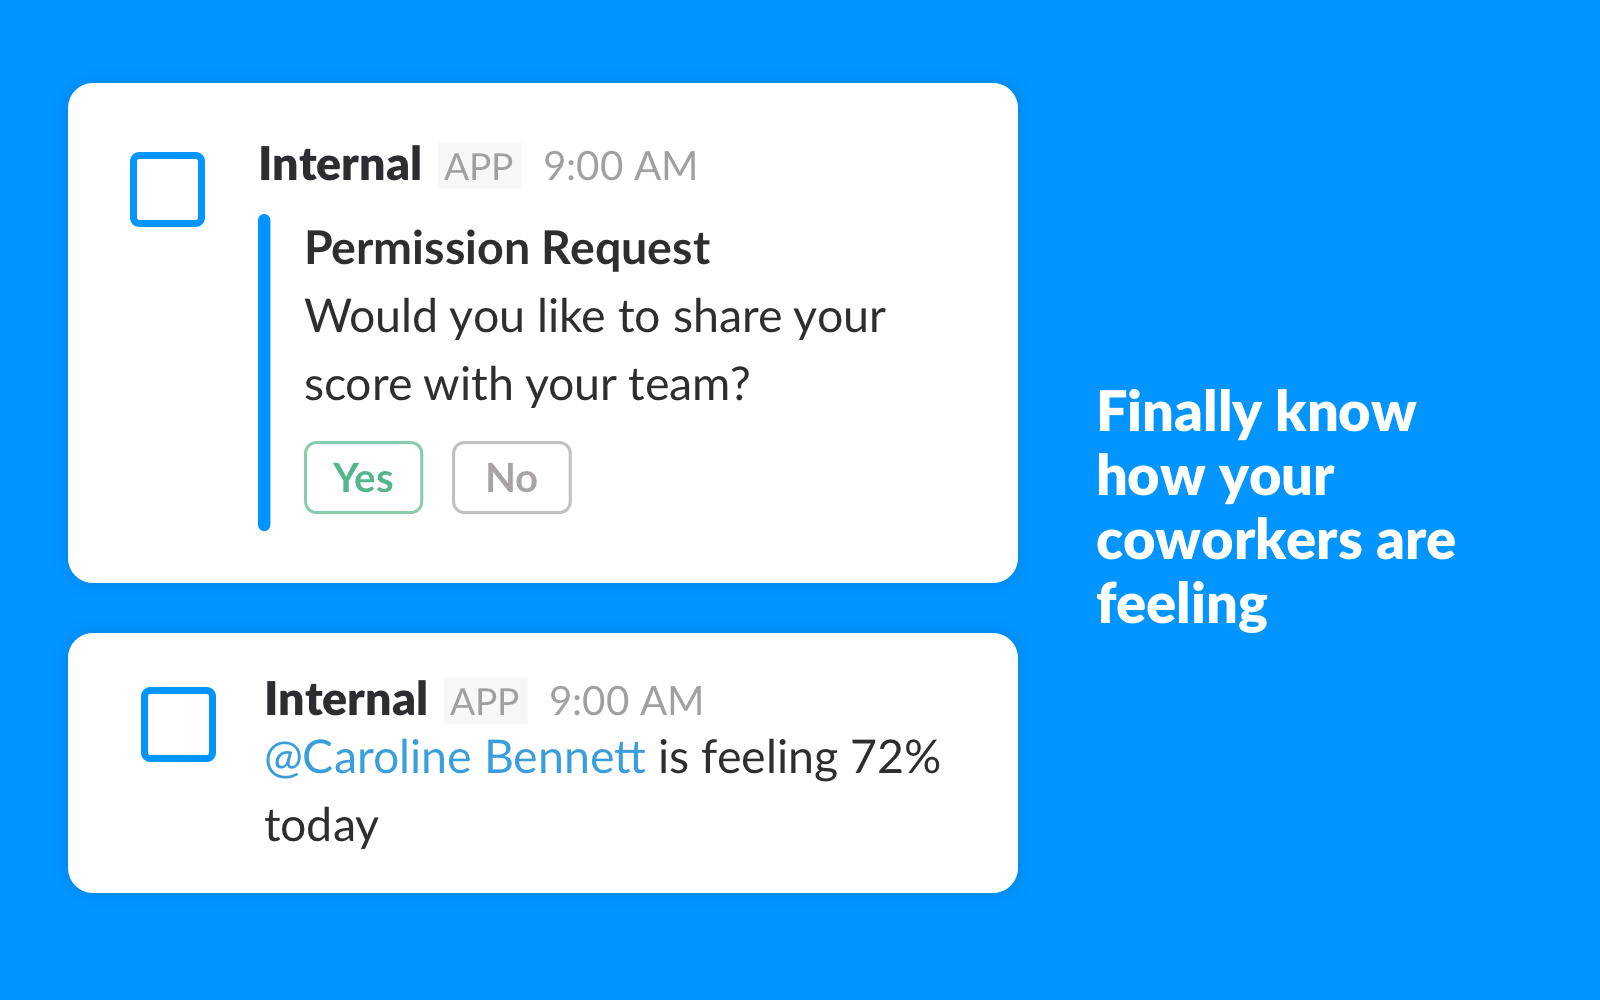 Get feedback from a vast remote working audience about Internal